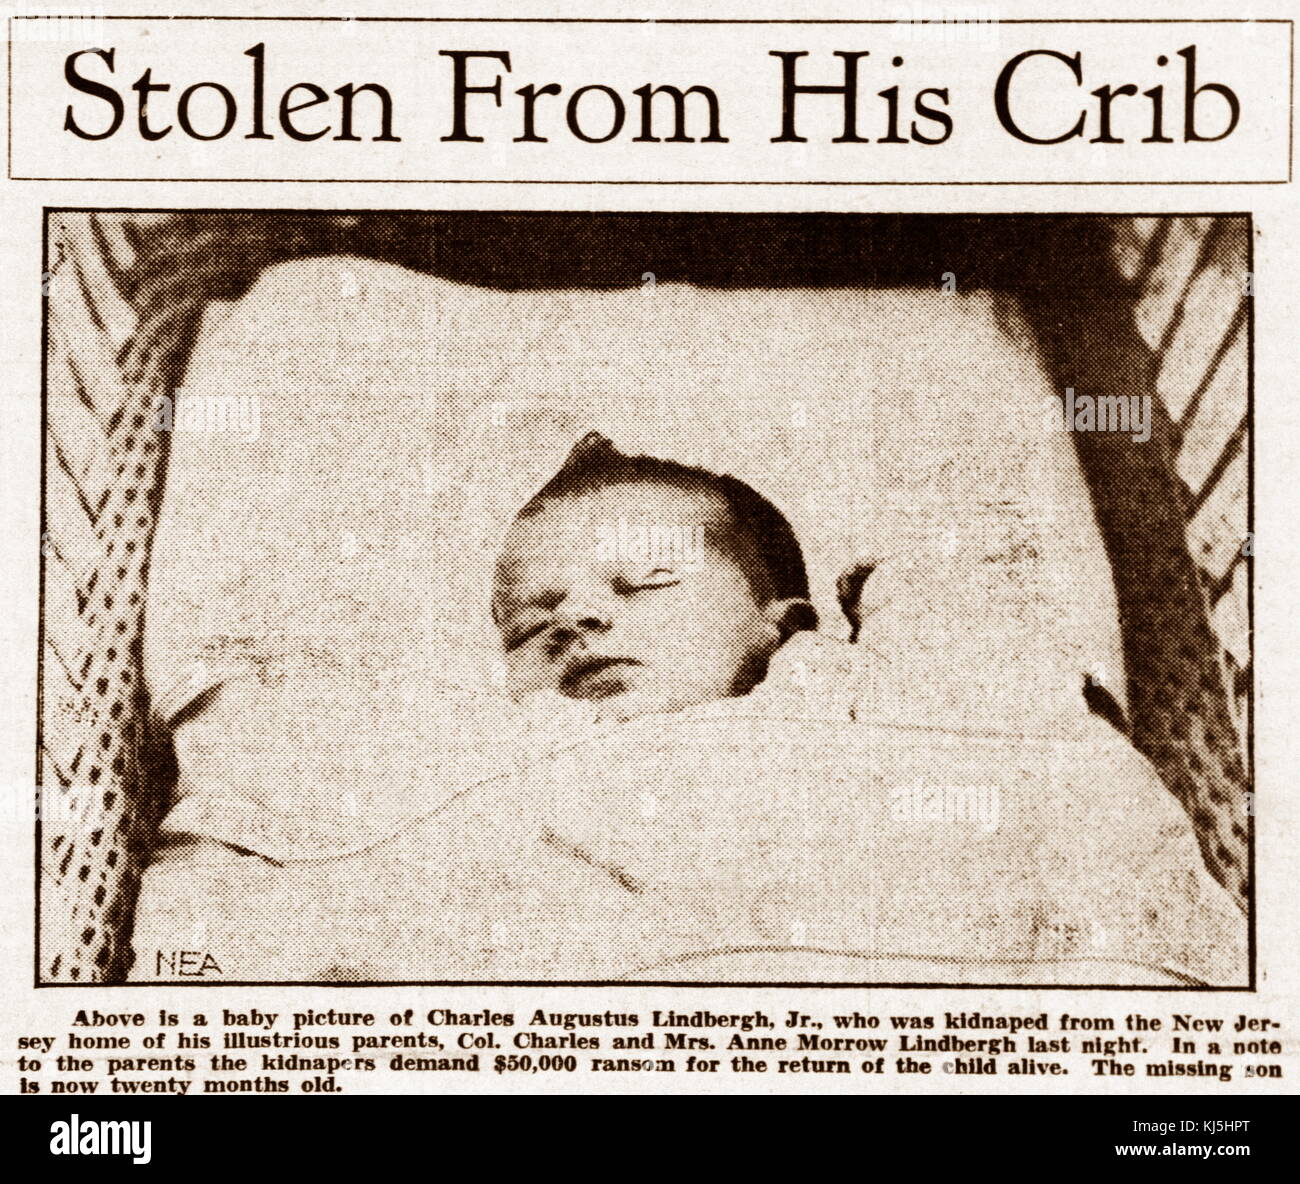 On March 1, 1932, Charles Augustus Lindbergh Jr., 20-month old son of aviator Charles Lindbergh and Anne Morrow Lindbergh, was abducted from his home in Highfields, New Jersey. his body was discovered nearby Stock Photo